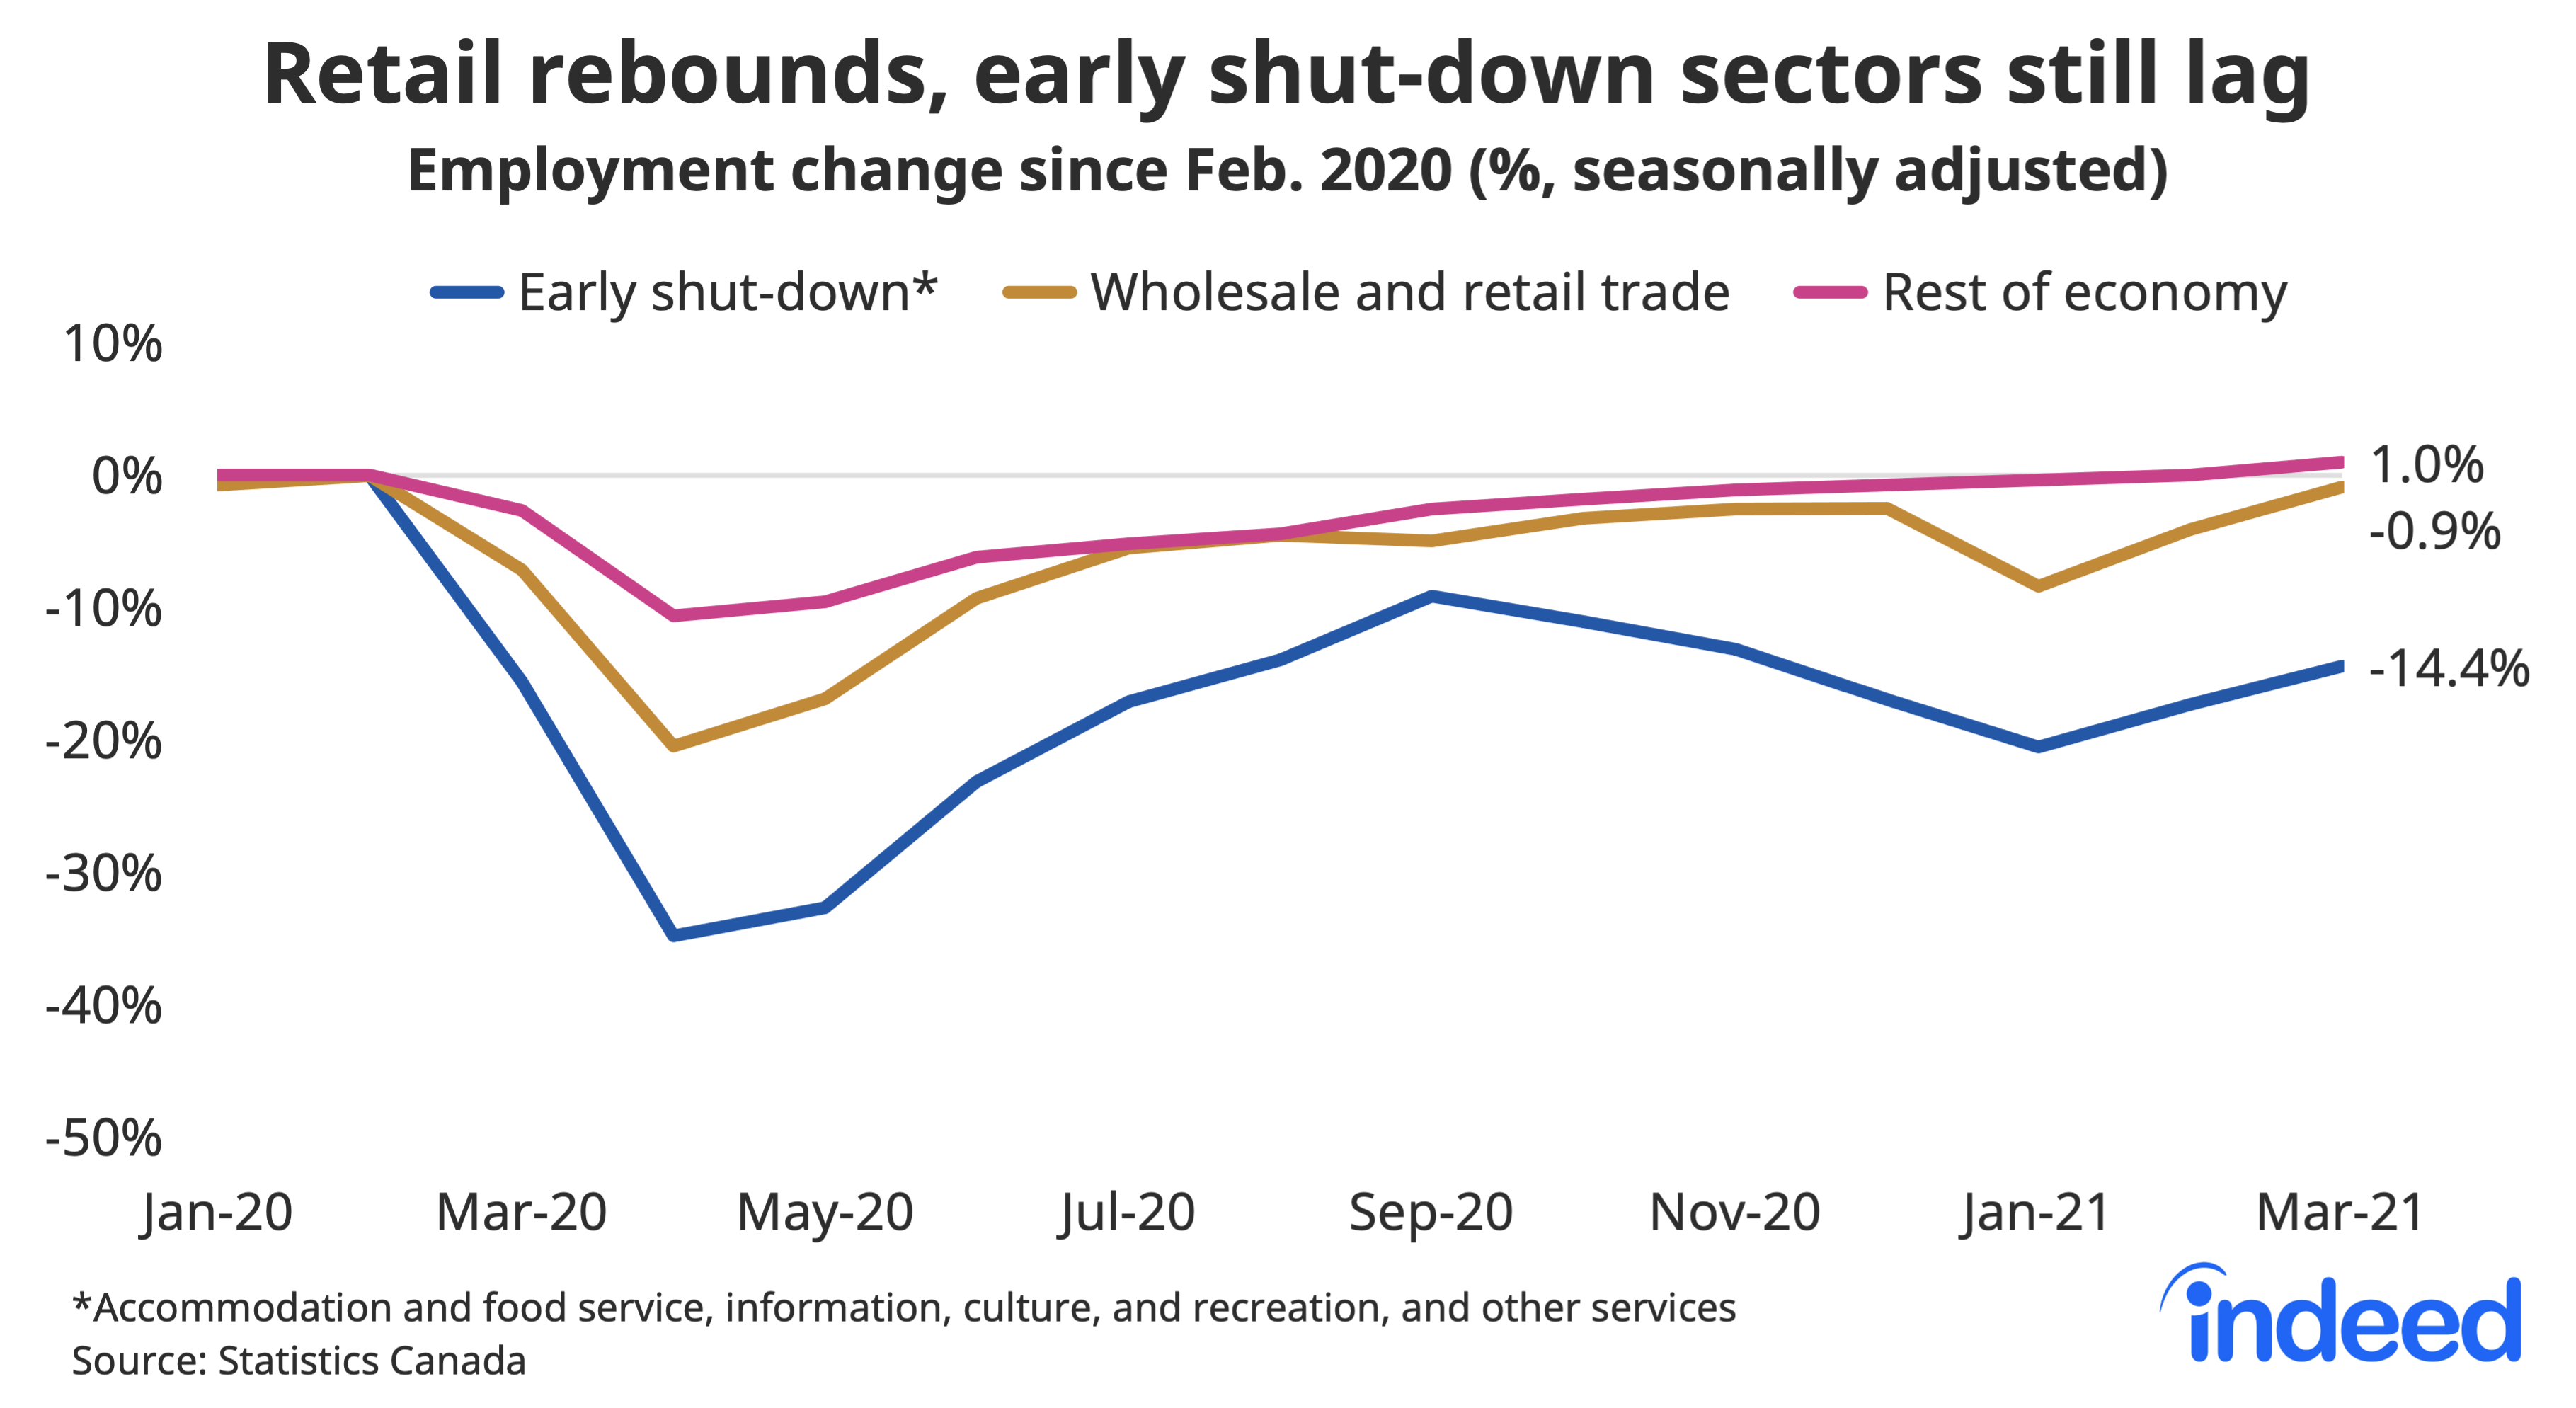 Line graph titled “Retail rebounds, early shut-down sectors still lag.” With a vertical axis ranging from -50% to 10%, Indeed tracked the percentage employment change along a horizontal axis ranging from January 2020 to April 2021 with lines representing “early shut-down,” “wholesale and retail trade,” and “rest of economy.” As of April 9 2021, employment in accommodation and food service was at -14.4%. Caption added post-publication.